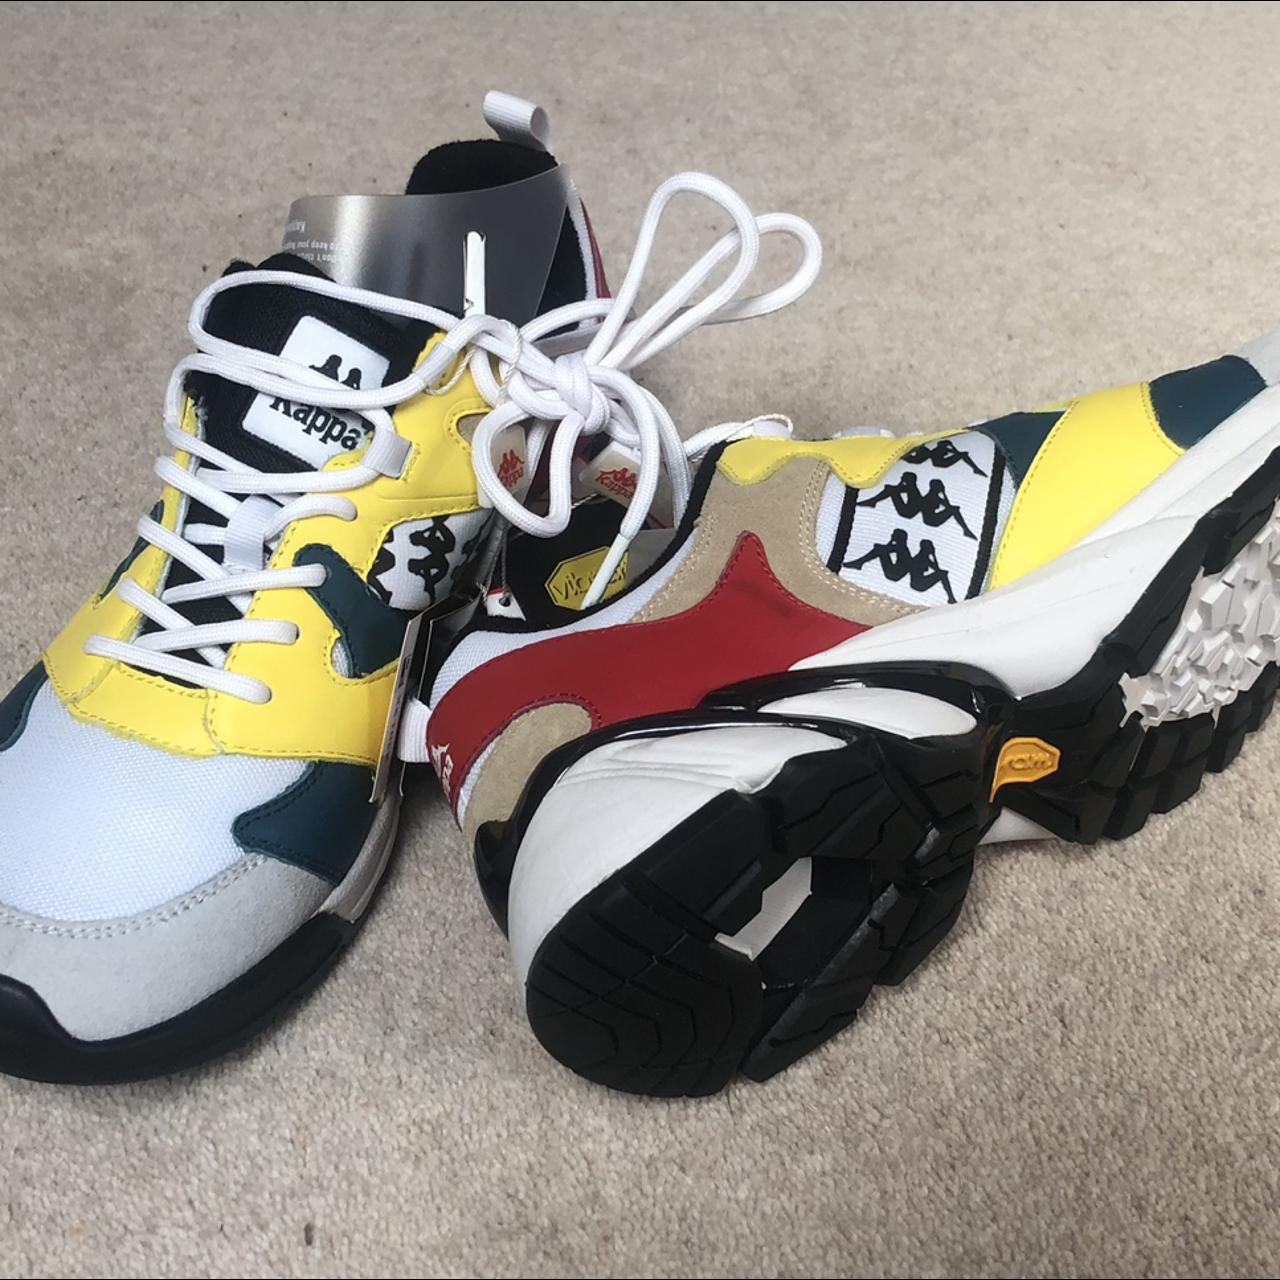 Kappa multi colour trainers/shoes Brand new with... - Depop